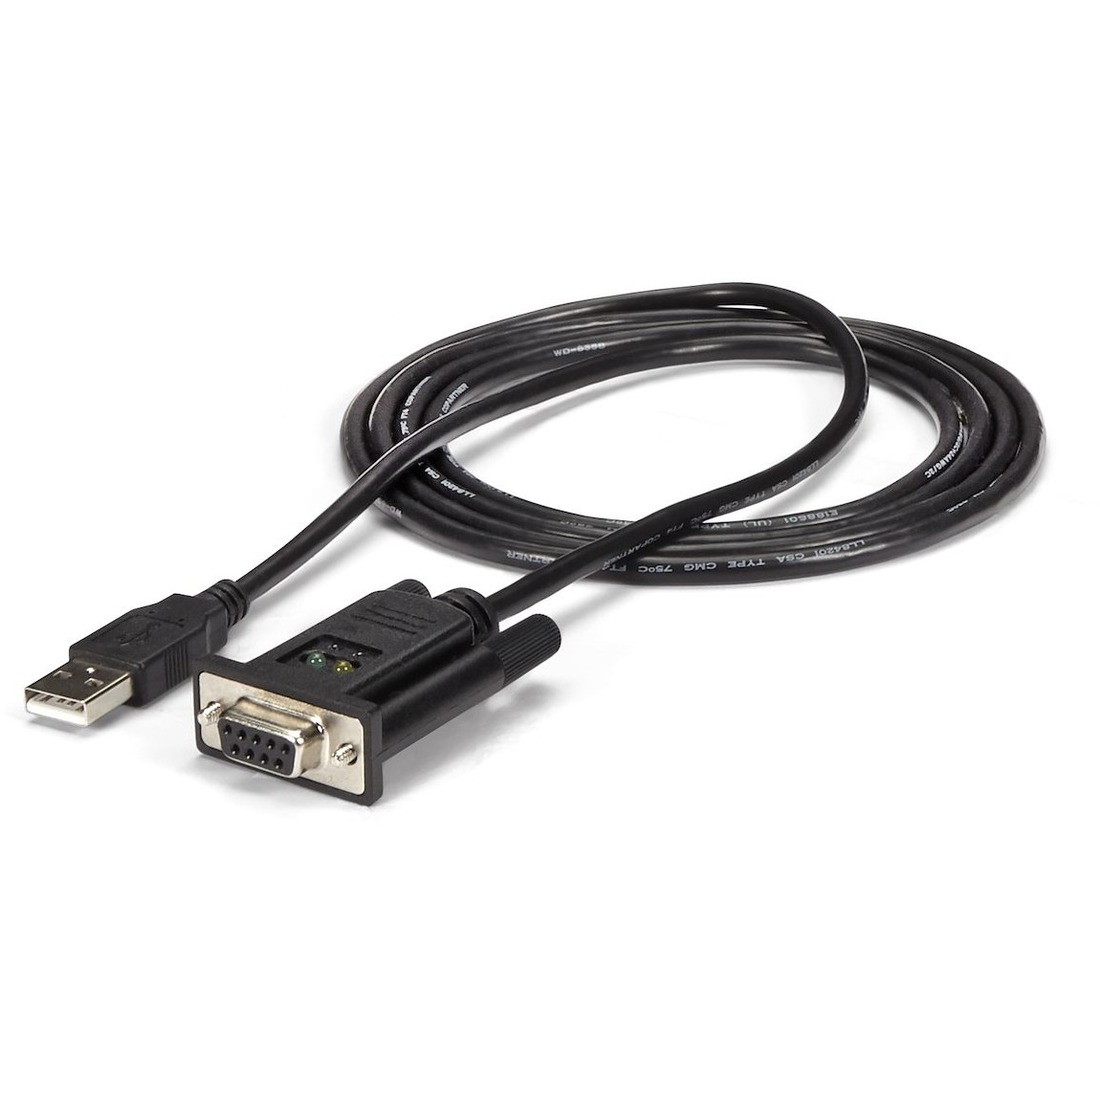 slids Opbevares i køleskab handikap StarTech.com USB to Serial Adapter - Null Modem - FTDI USB UART Chip - DB9  (9-pin) - USB to RS232 Adapter - Add a Null Modem RS232 serial port to your  laptop